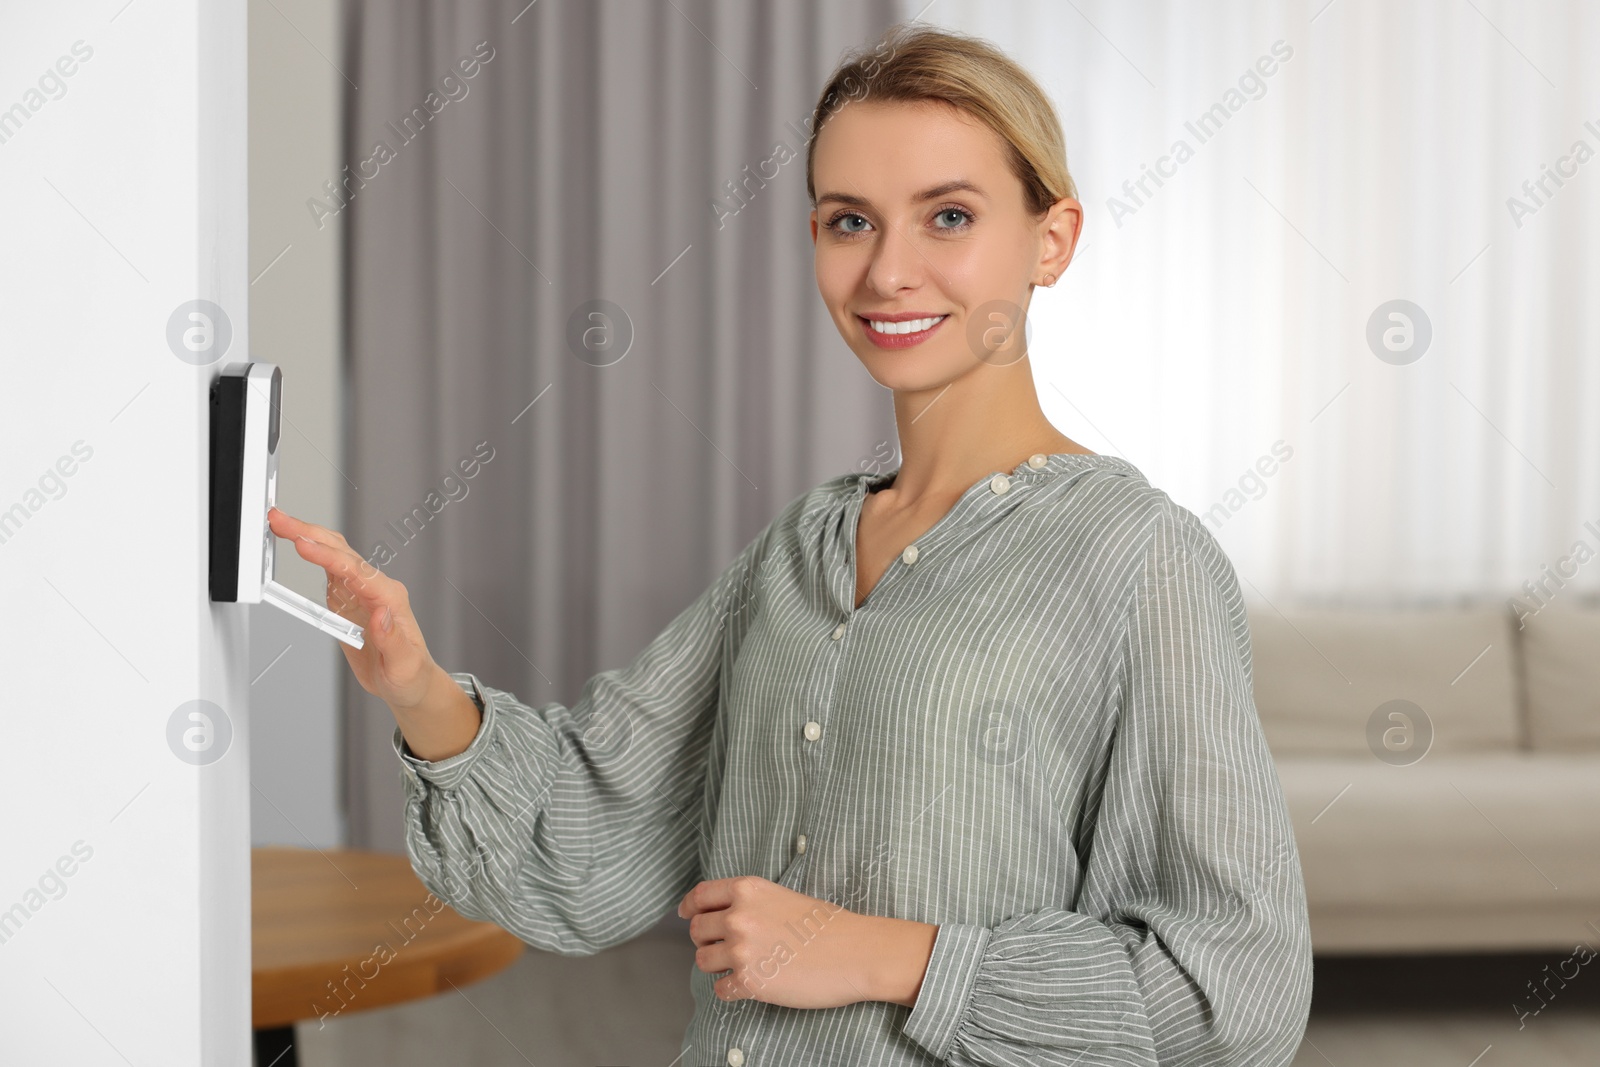 Photo of Smiling woman entering code on home security system in room